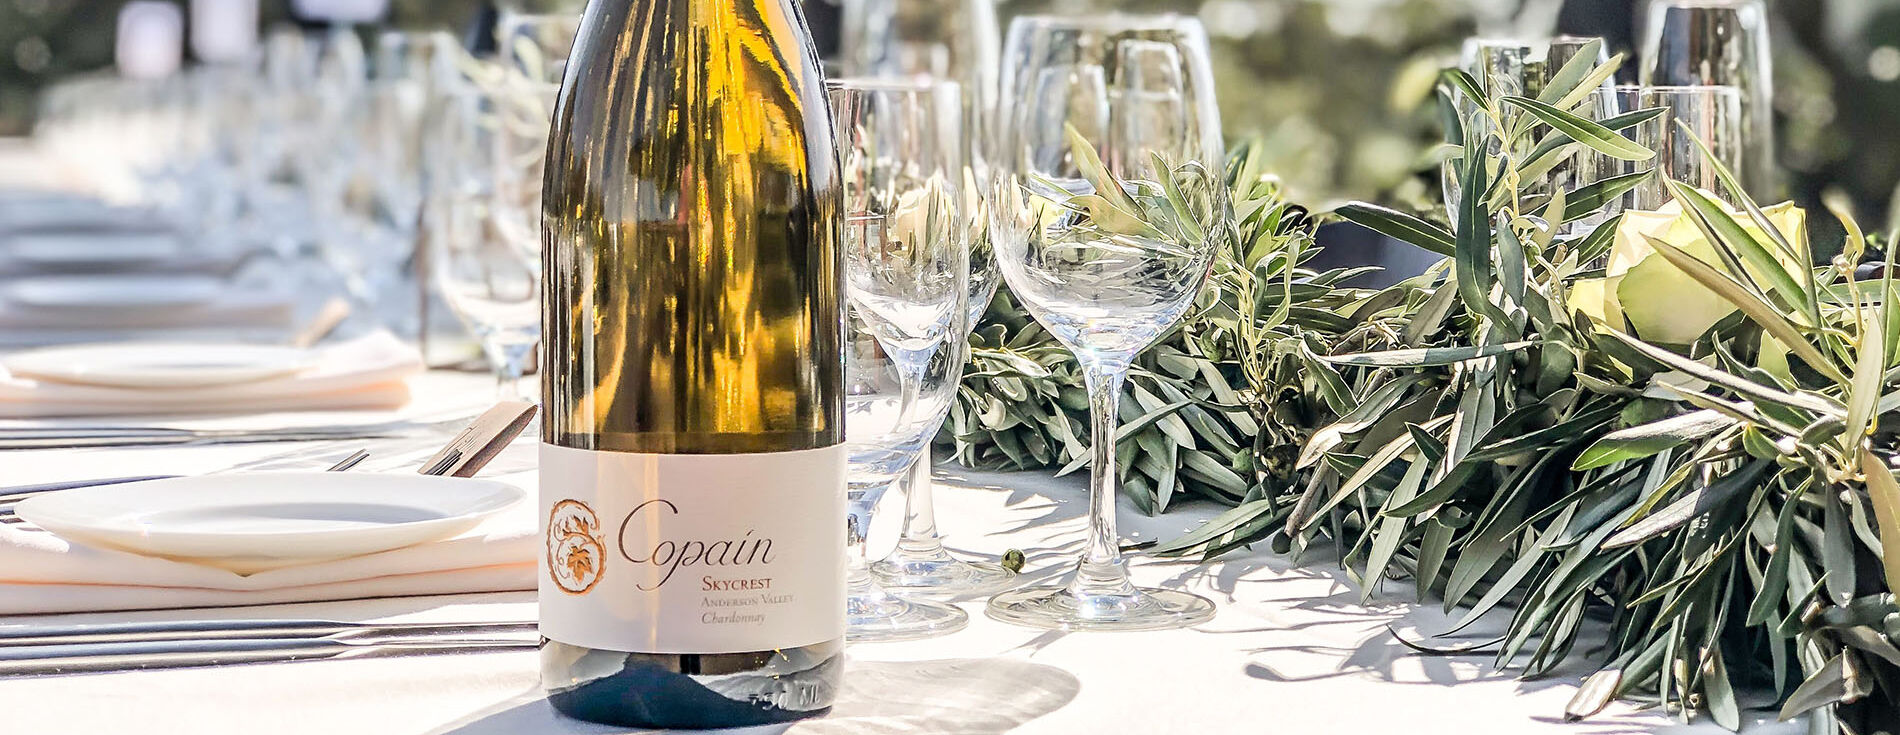 a bottle of Copain wine on a table with olive branches in the background